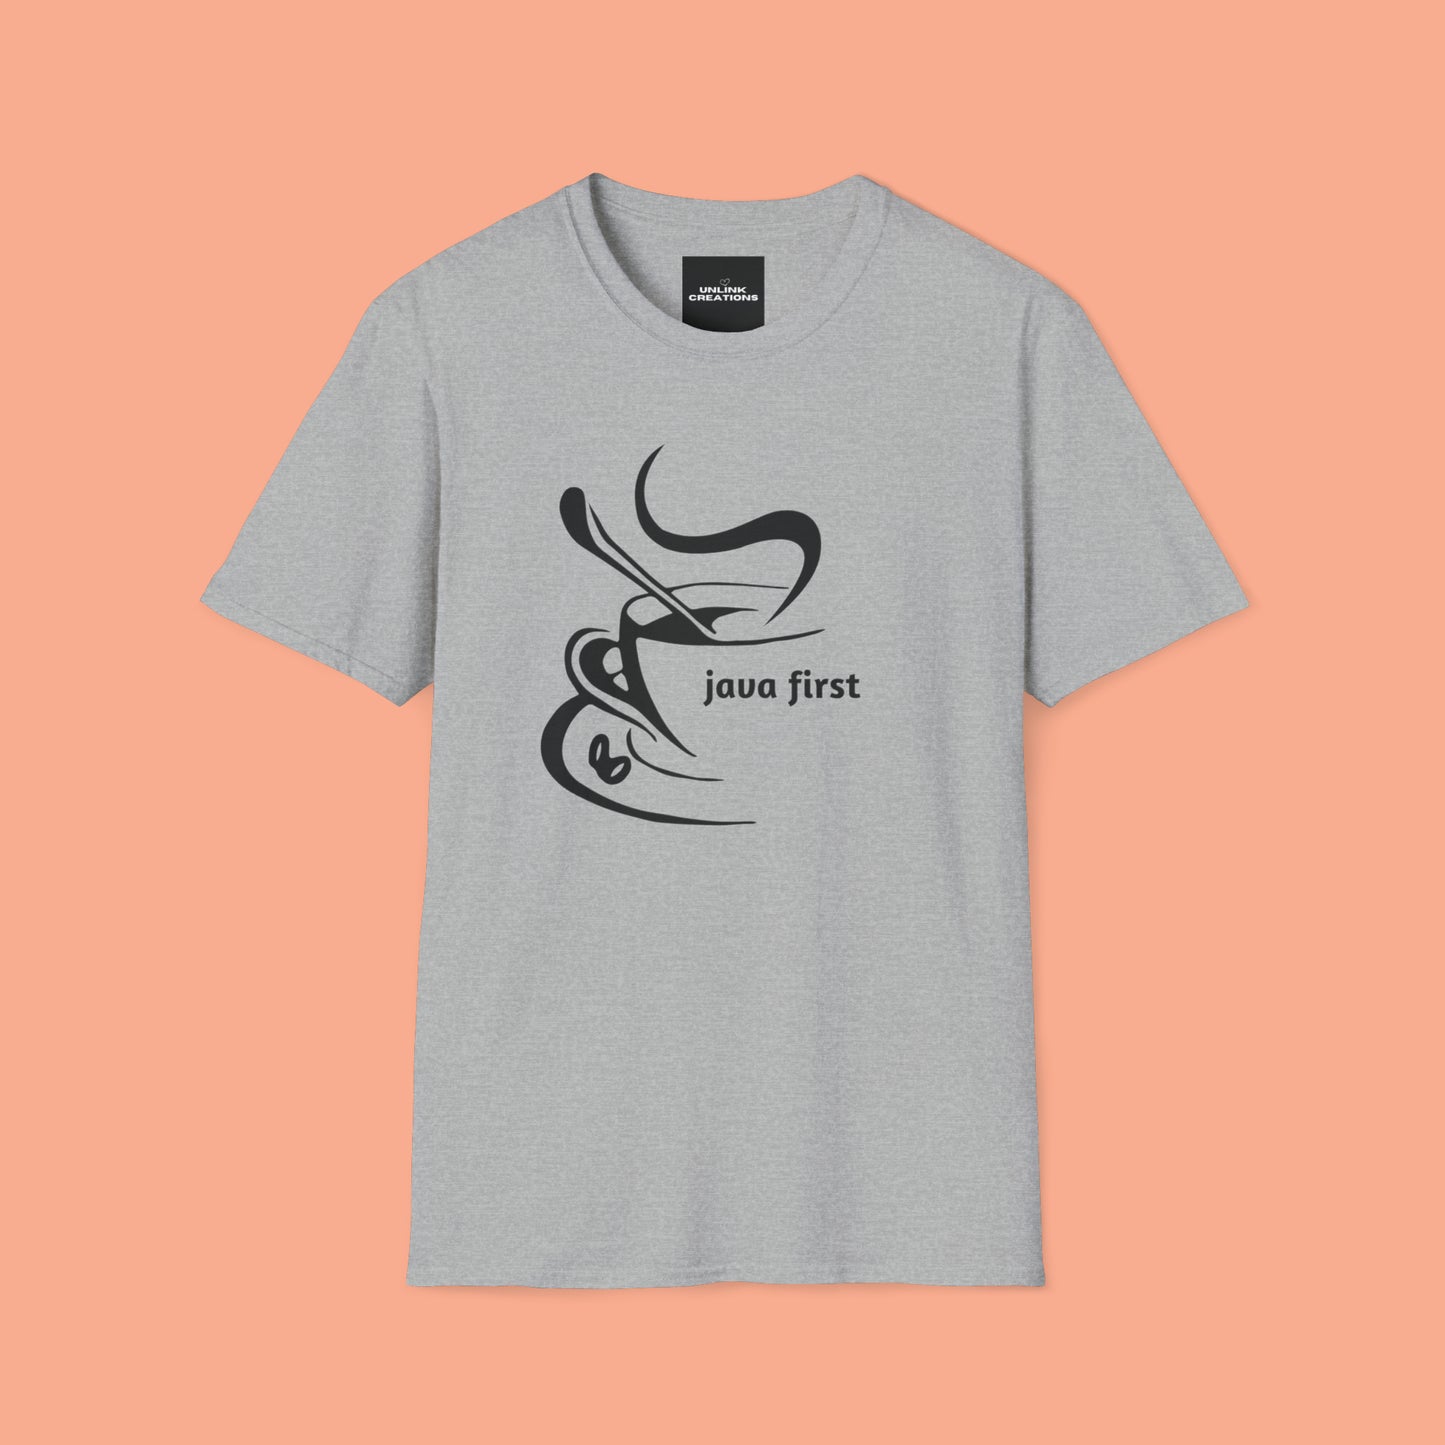 A simple and elegant design for that “java first” on this Unisex Softstyle T-Shirt design.